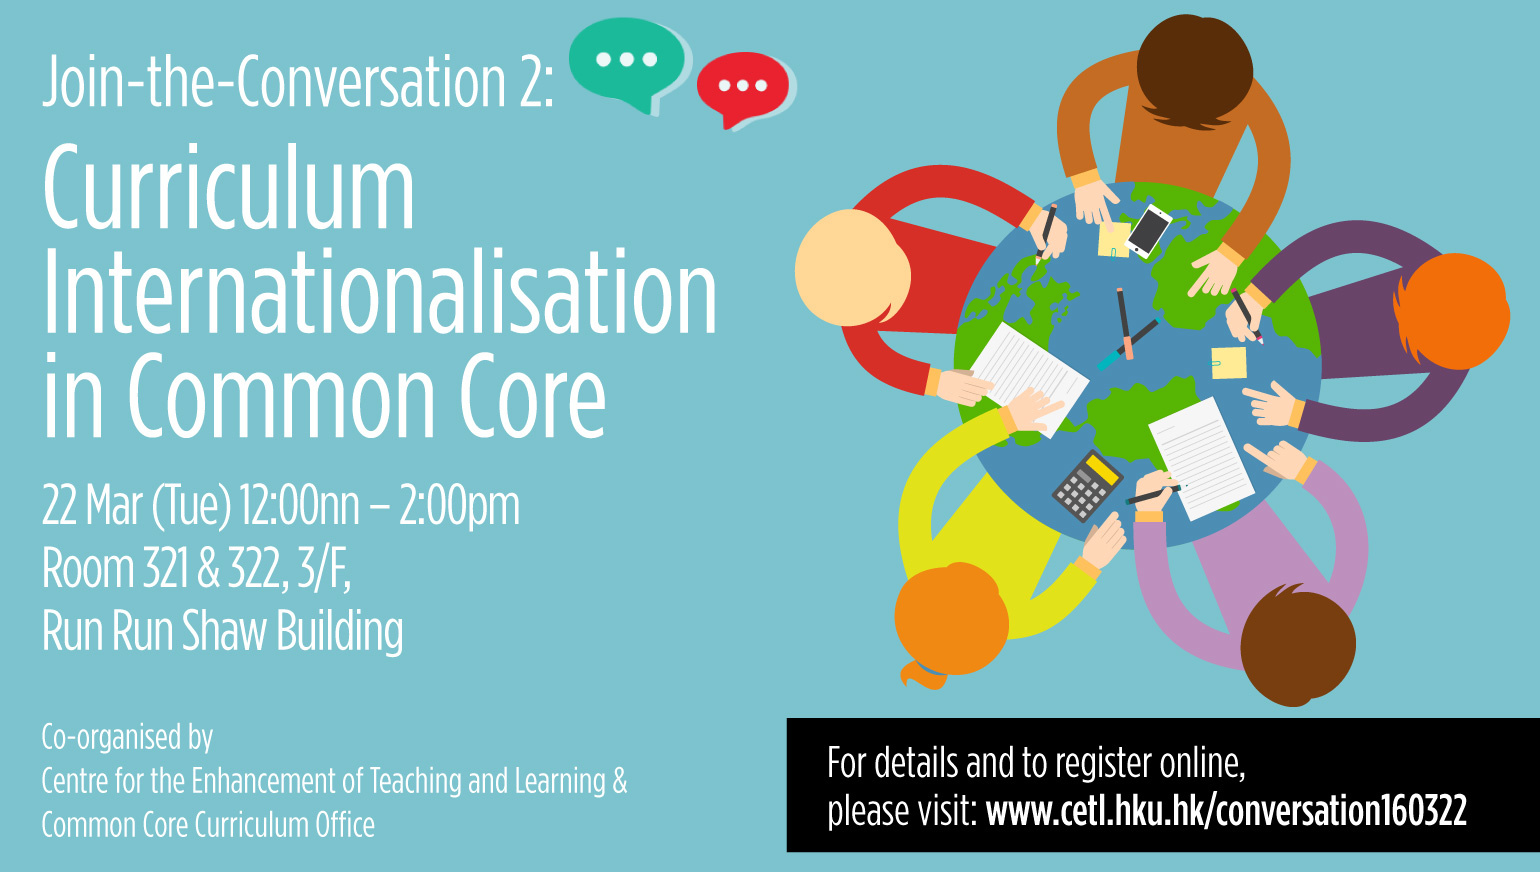 Join-the-Conversation (2): Curriculum Internationalisation in the Common Core